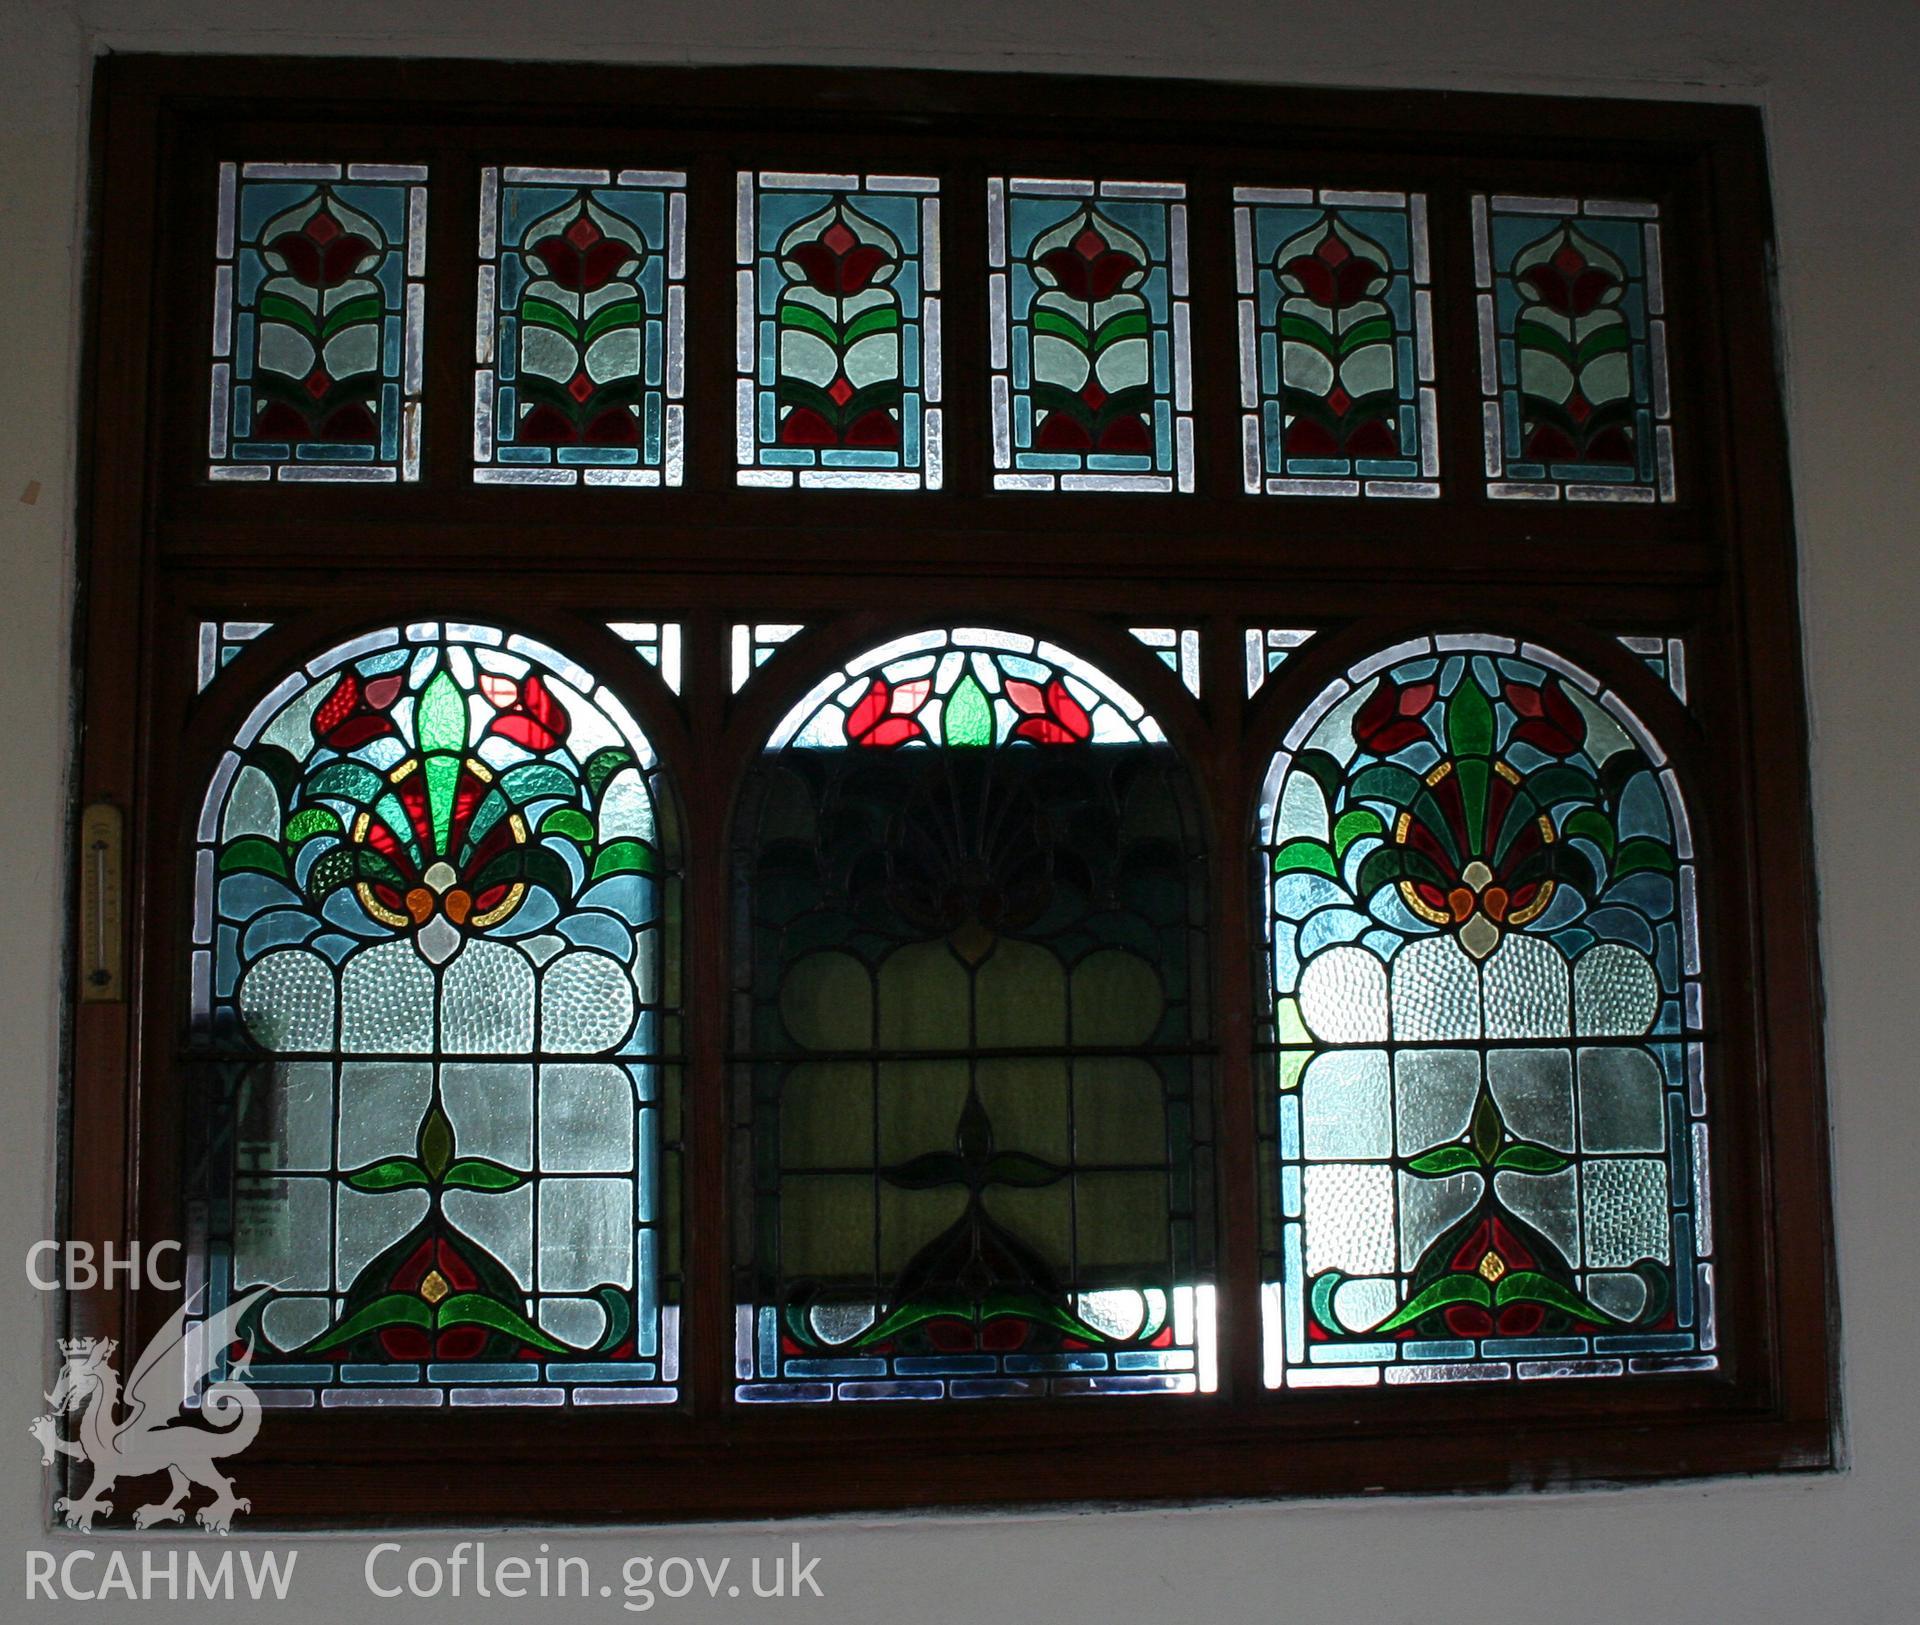 Bethany Chapel, stained glass window between the vestibule and main interior.